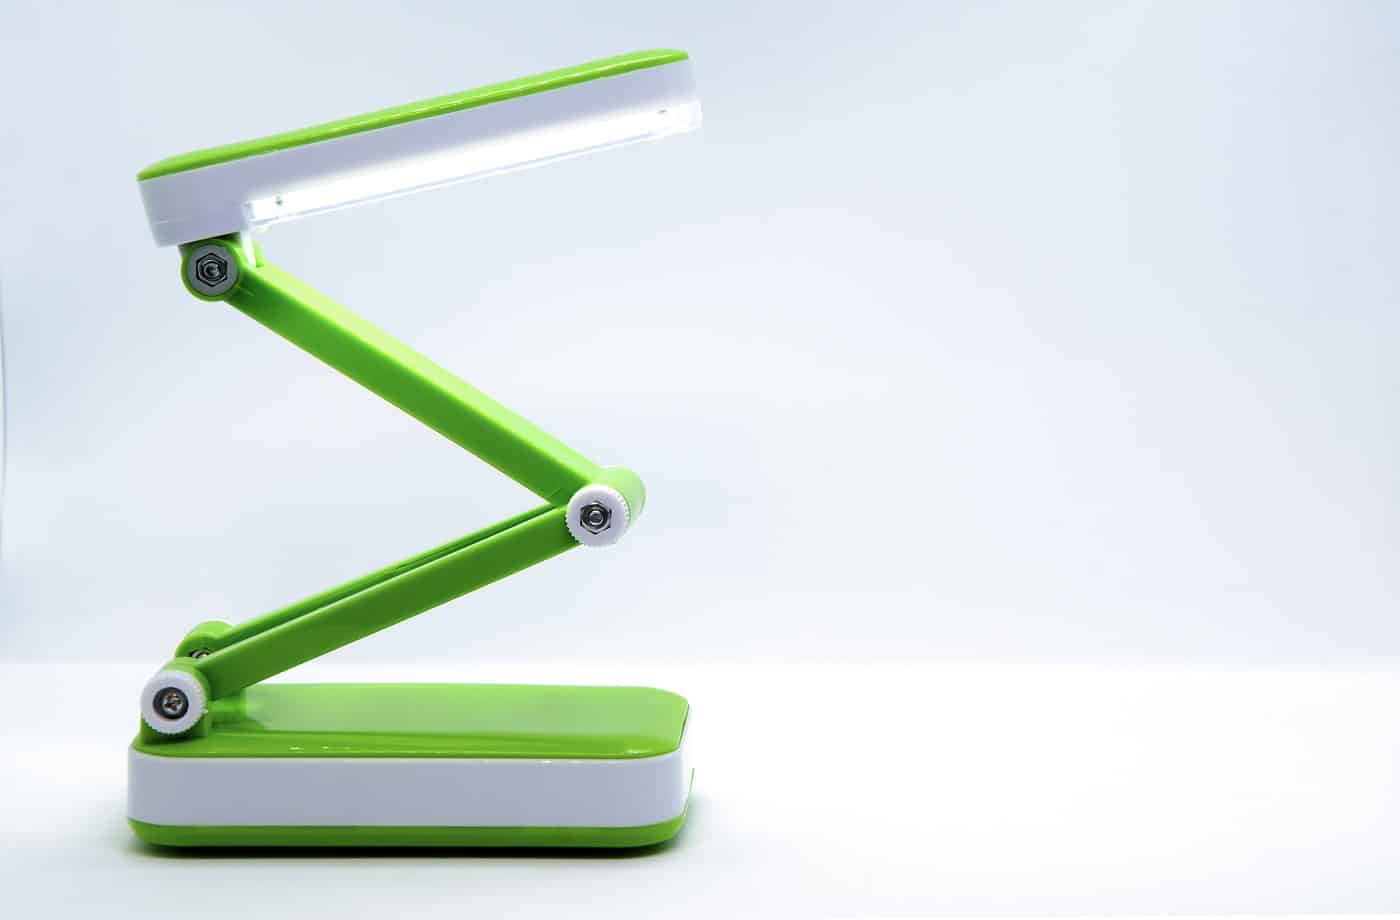 Compact foldable portable LED Desk Lamp with flexible body made of bright green plastic on a white background. Space for text.